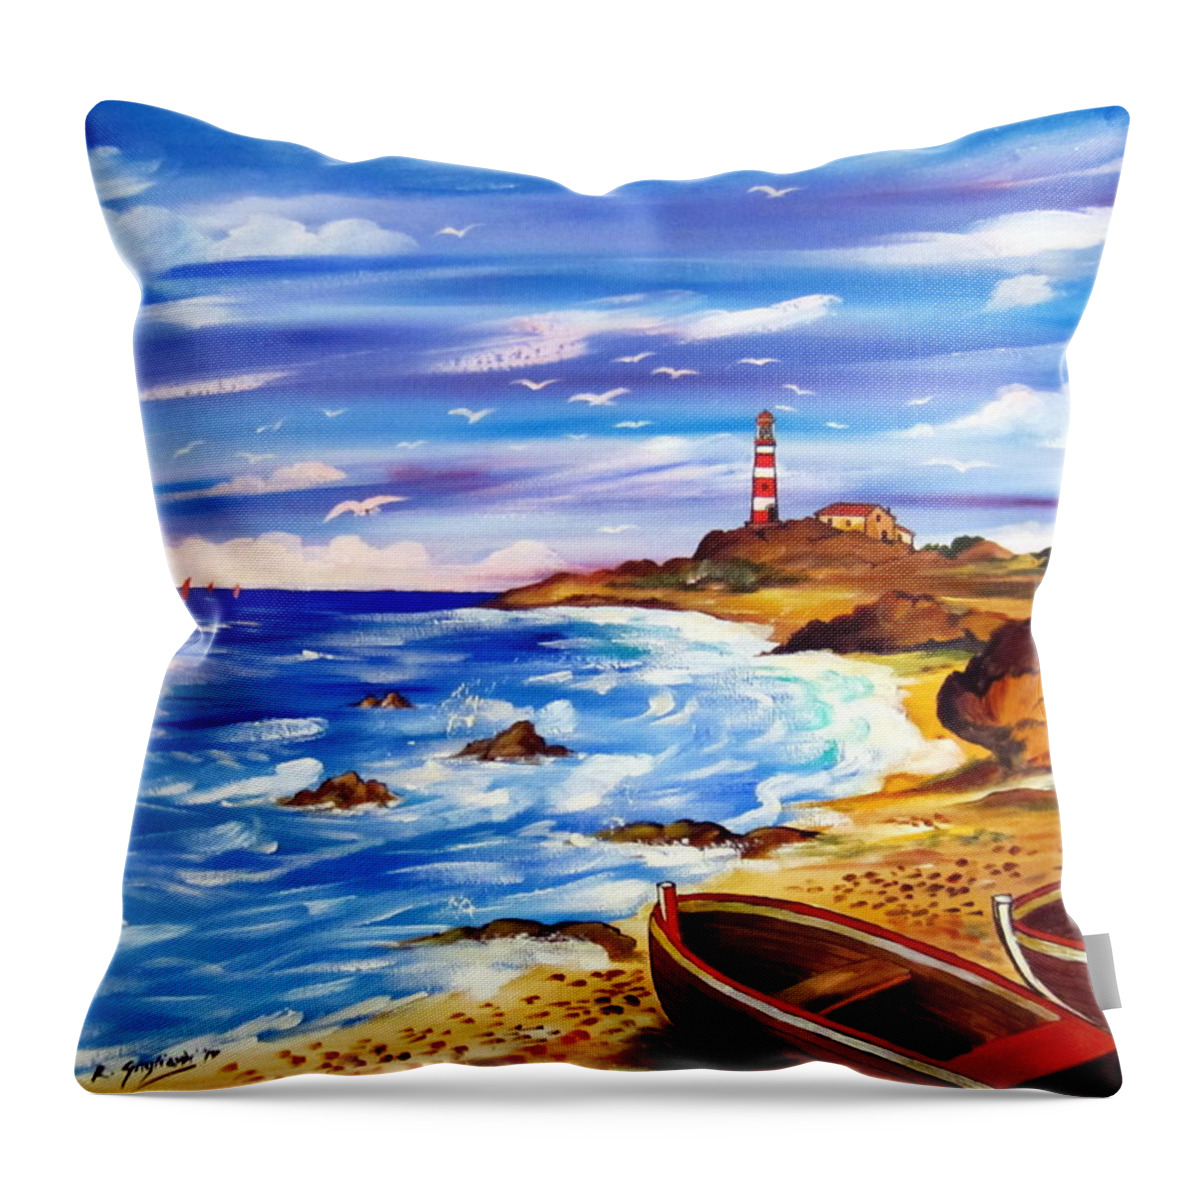 Landscape Throw Pillow featuring the painting Lighthouse Island by Roberto Gagliardi